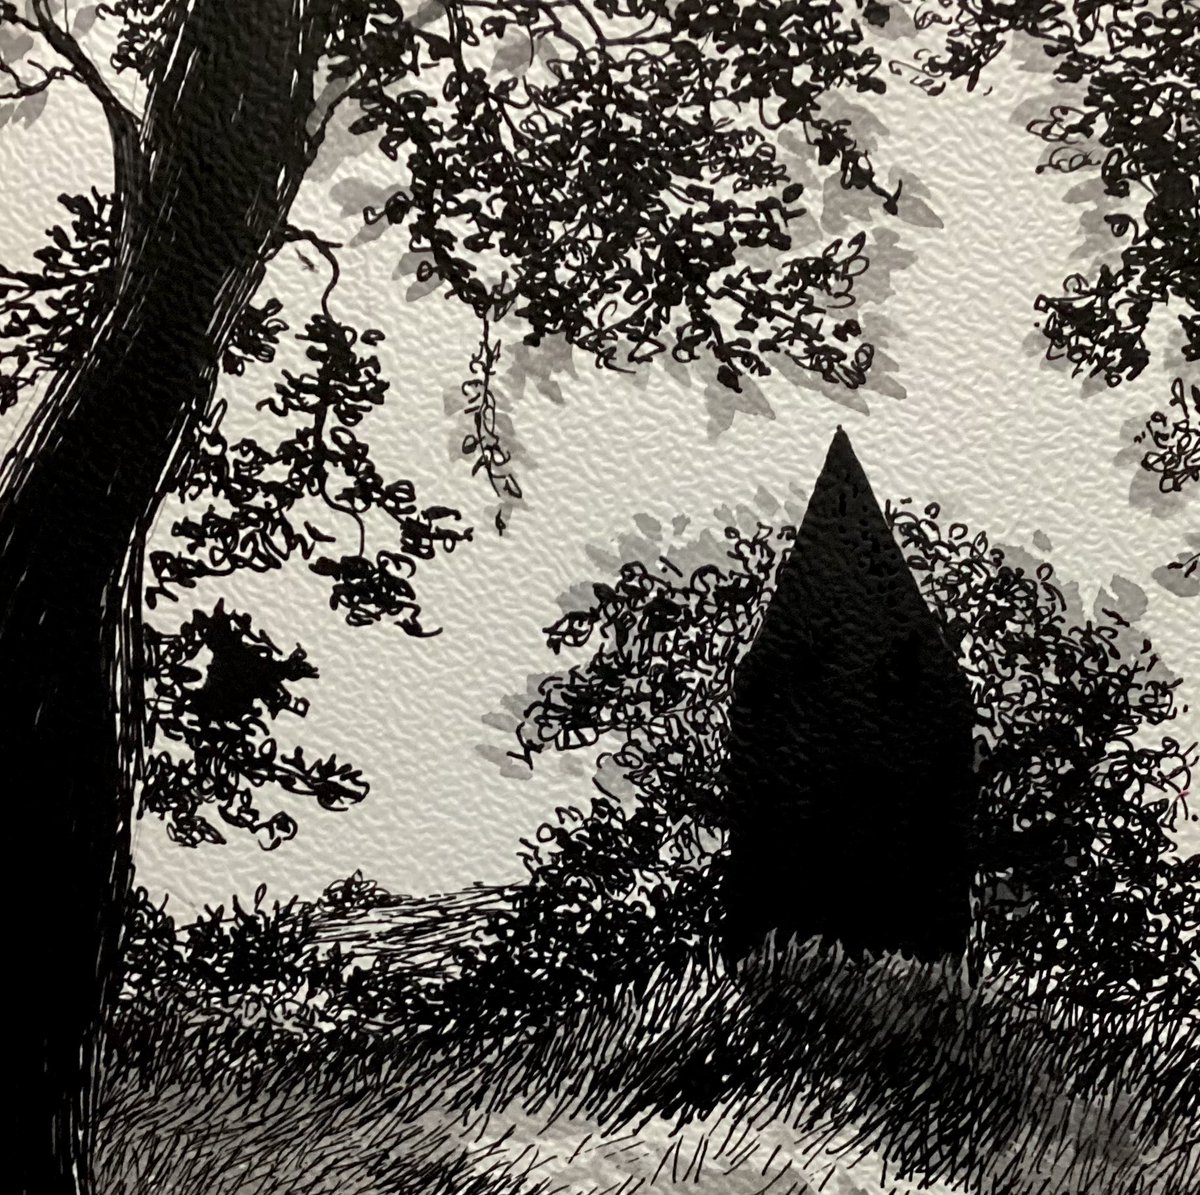 WIP - detail

#horrorauthor #coverartist #darkart #horror #darkartist #coverart #horrorbook #illustrationart #darkfiction #haunted #wipart #ghost #spooky #bookcover #bookcoverart #forest #wip